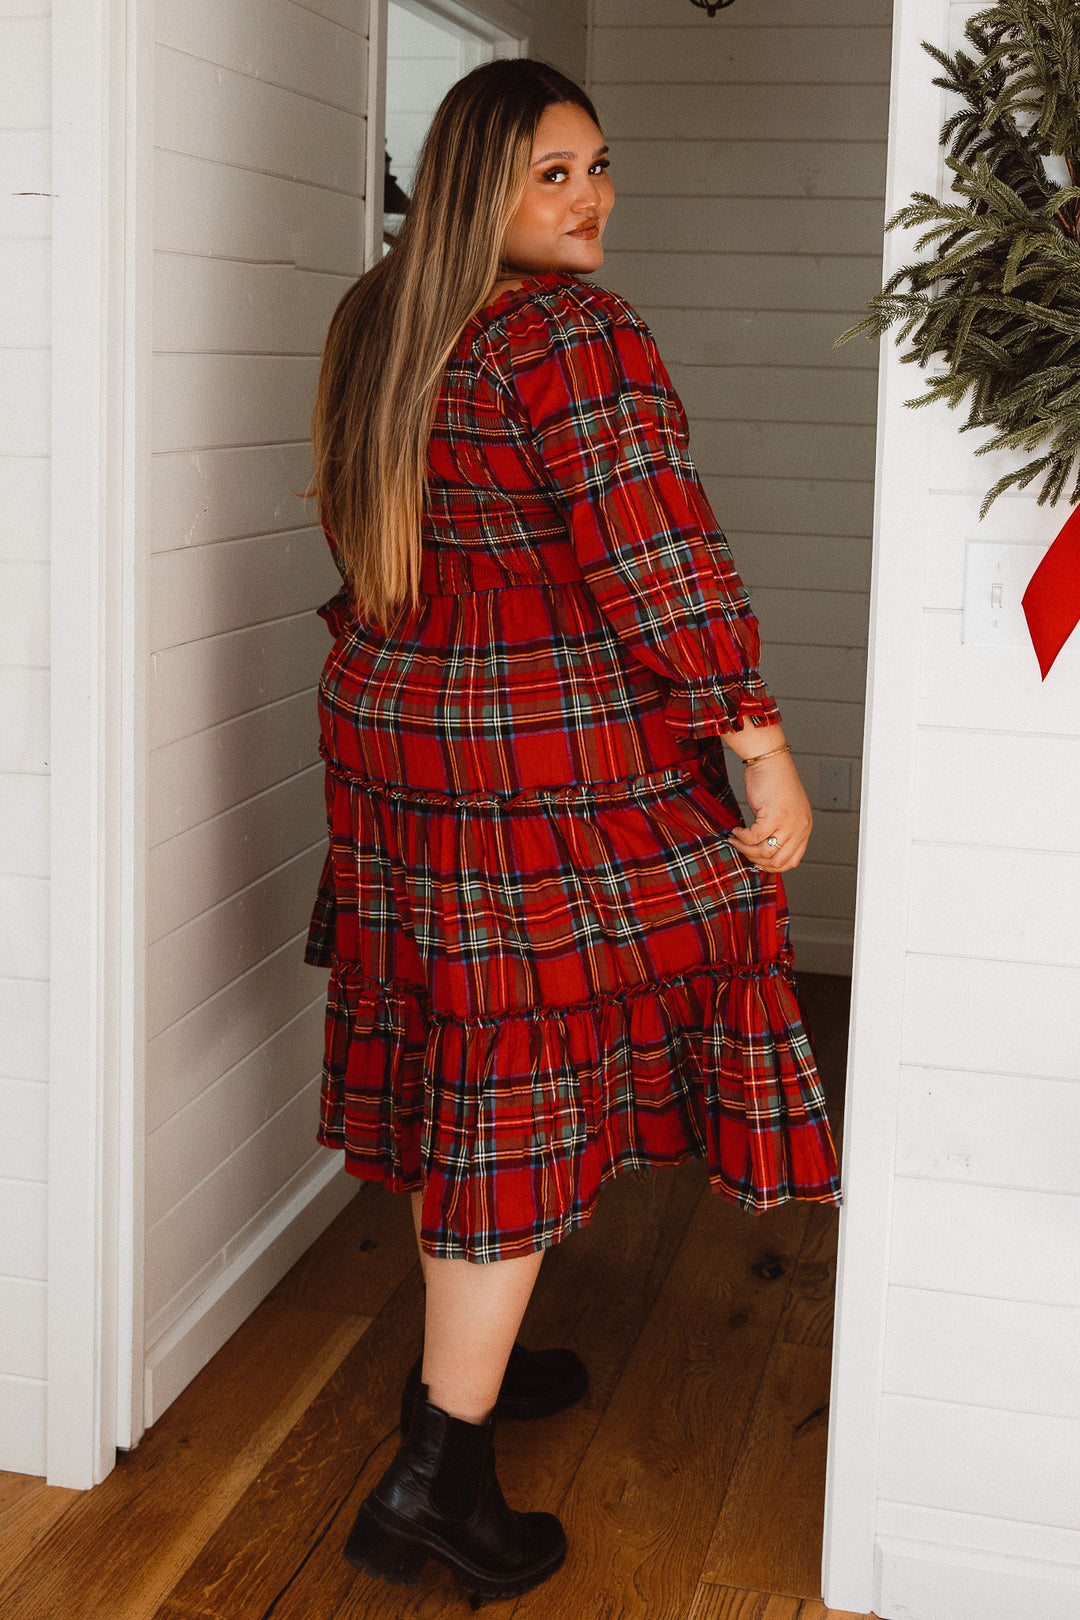 Madeline Dress in Holiday Plaid